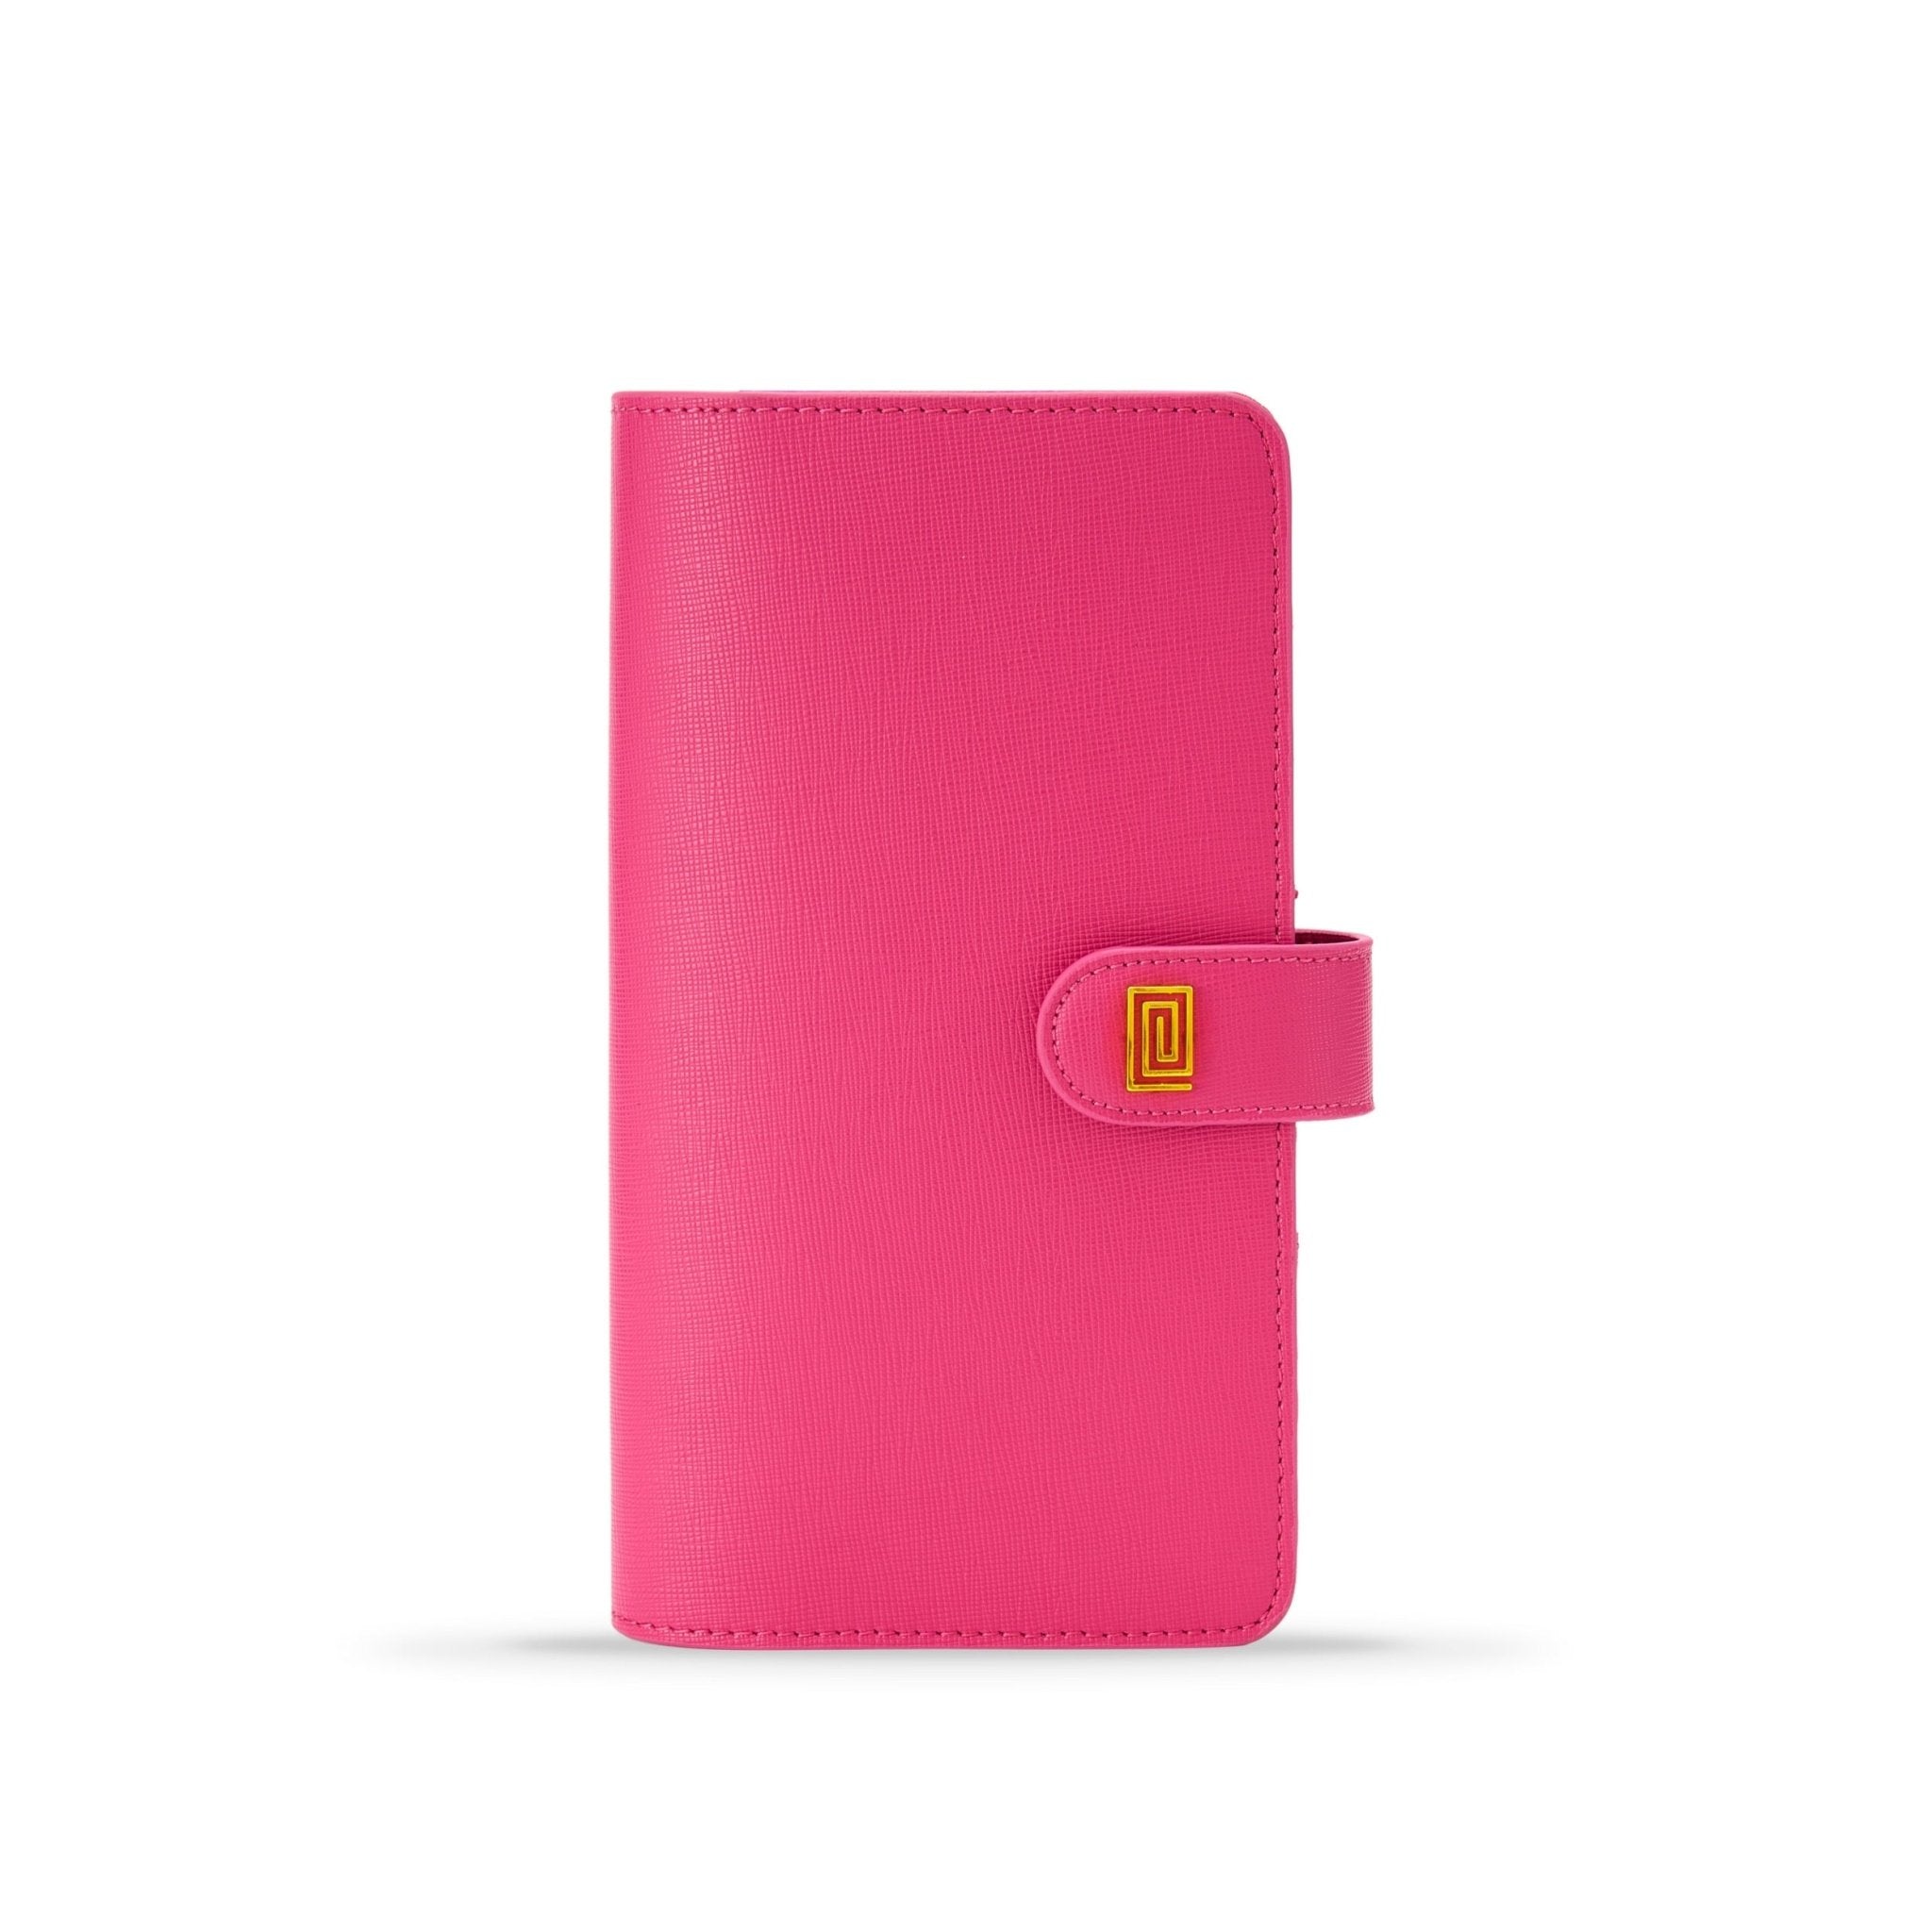 Pink Rose Saffiano Slim Compact | OUTLET | SL5. Slim Compact Wallet Ringless Agenda | Wallet Planner Cover | Final Sale | NOTIQ